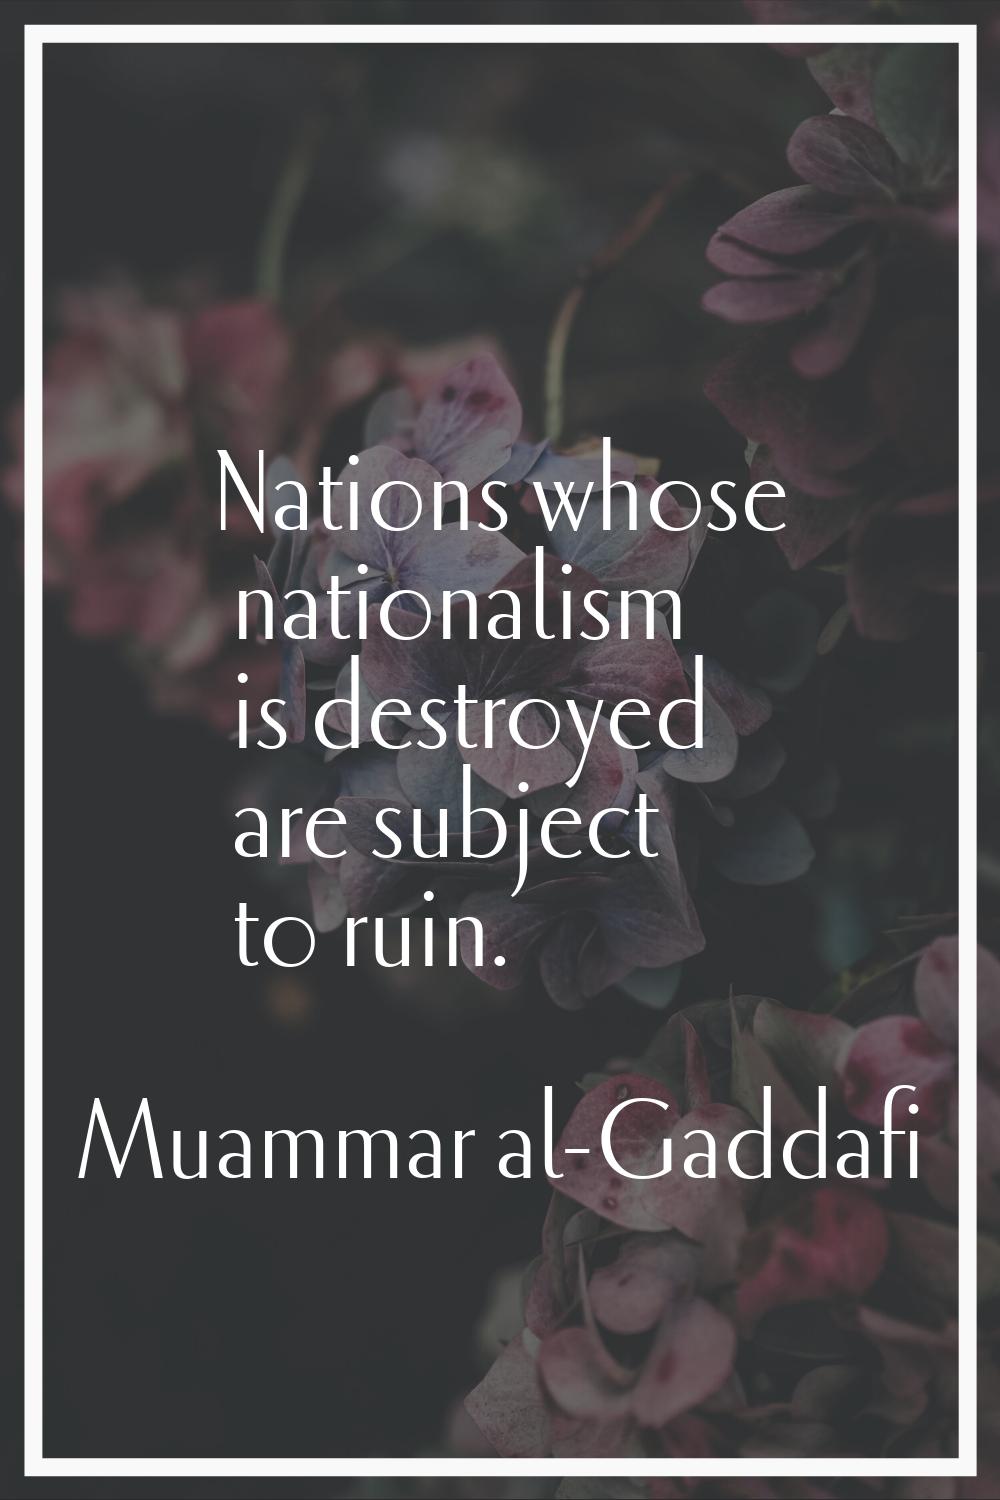 Nations whose nationalism is destroyed are subject to ruin.